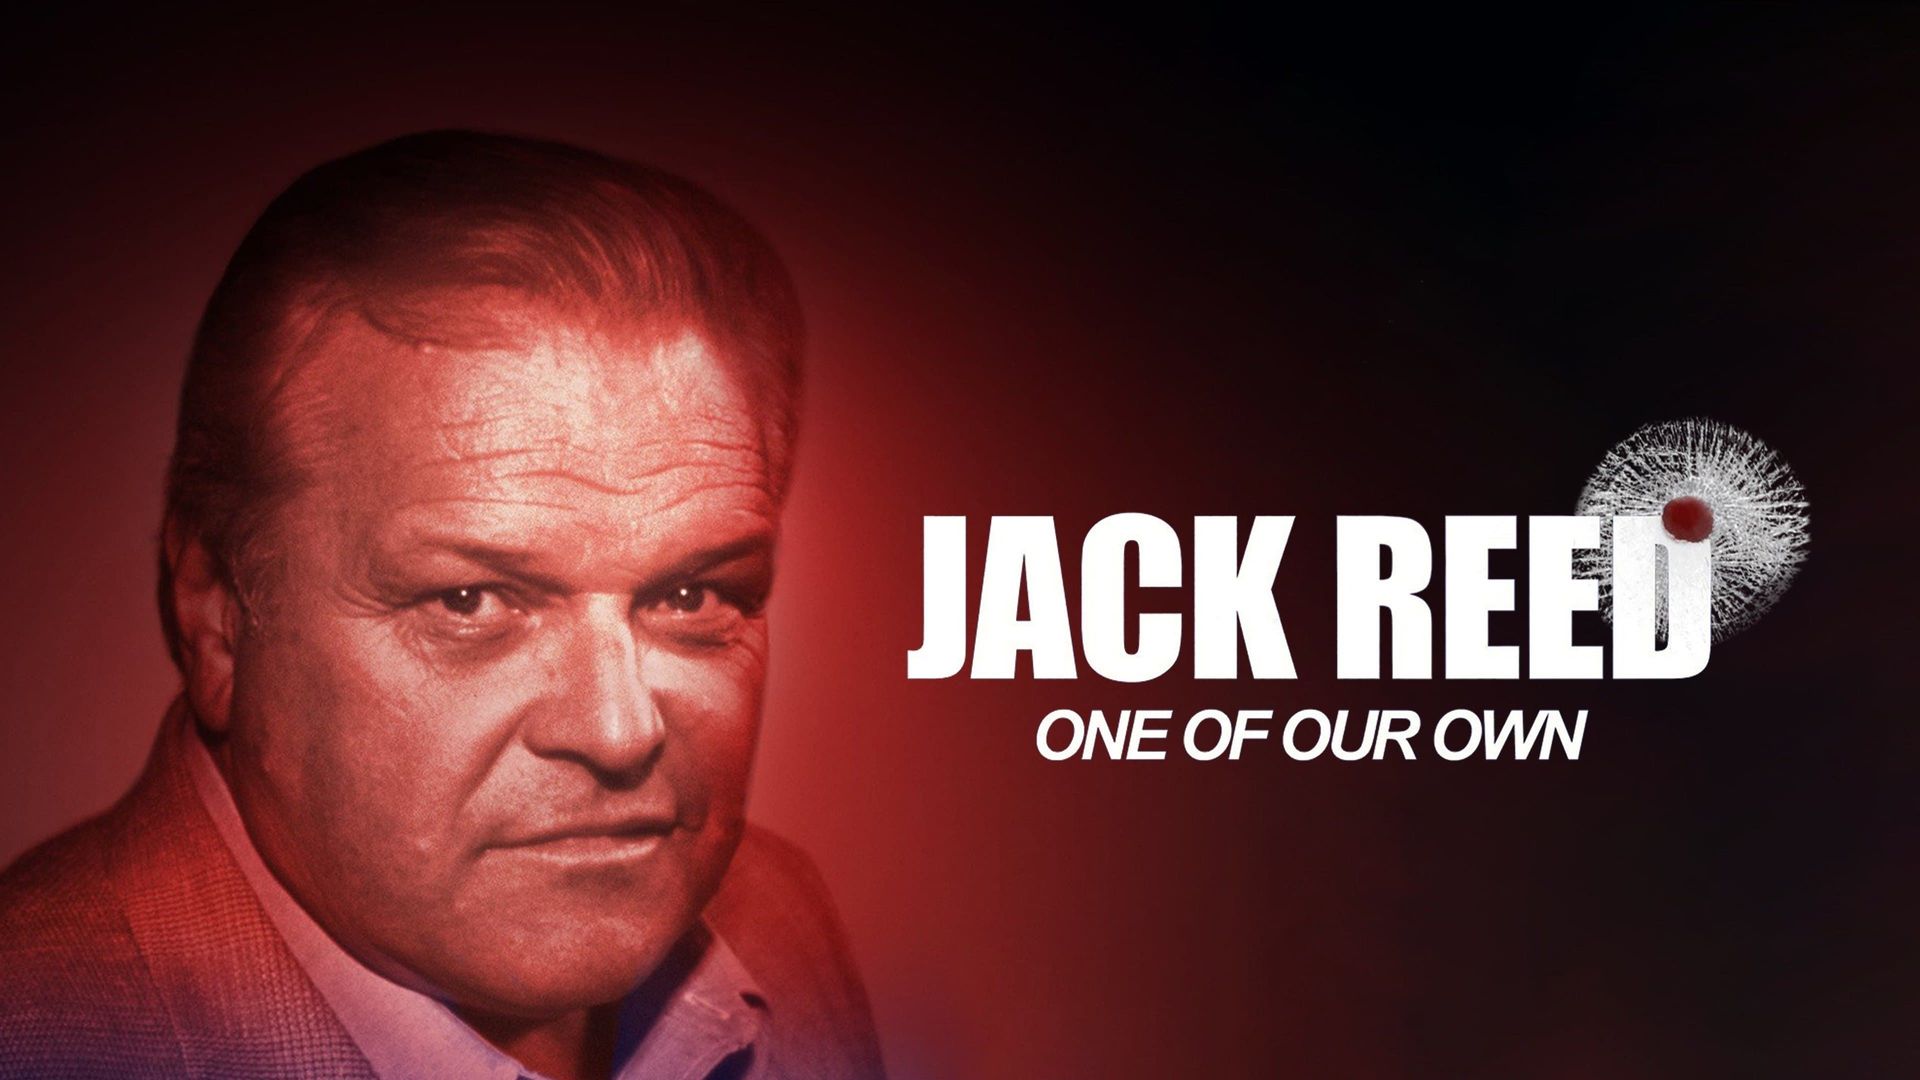 Jack Reed: One of Our Own background